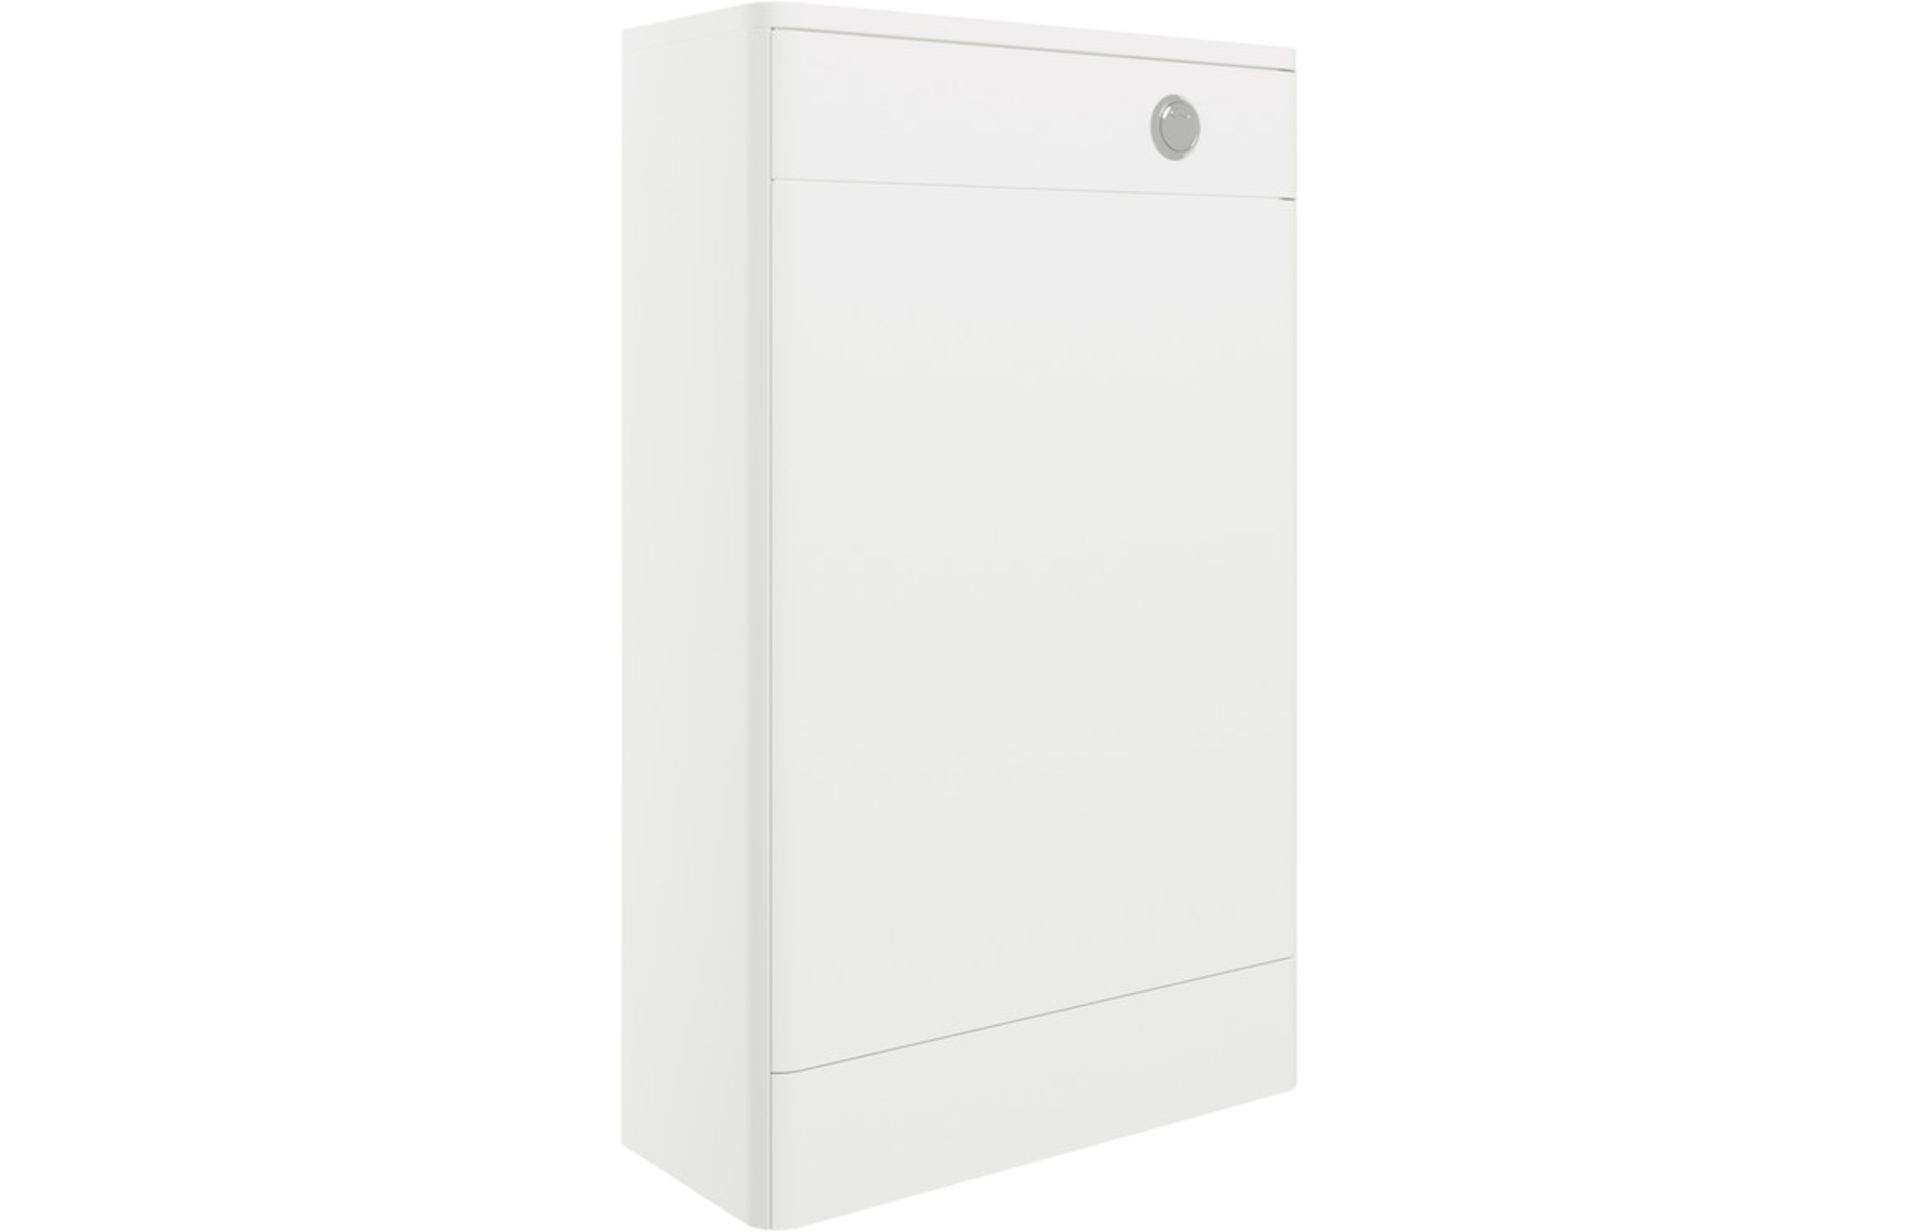 (DT104) NEW & BOXED Gatsby 506mm WC Unit – White Gloss. Range Gatsby Size Dimensions: H 830 x W